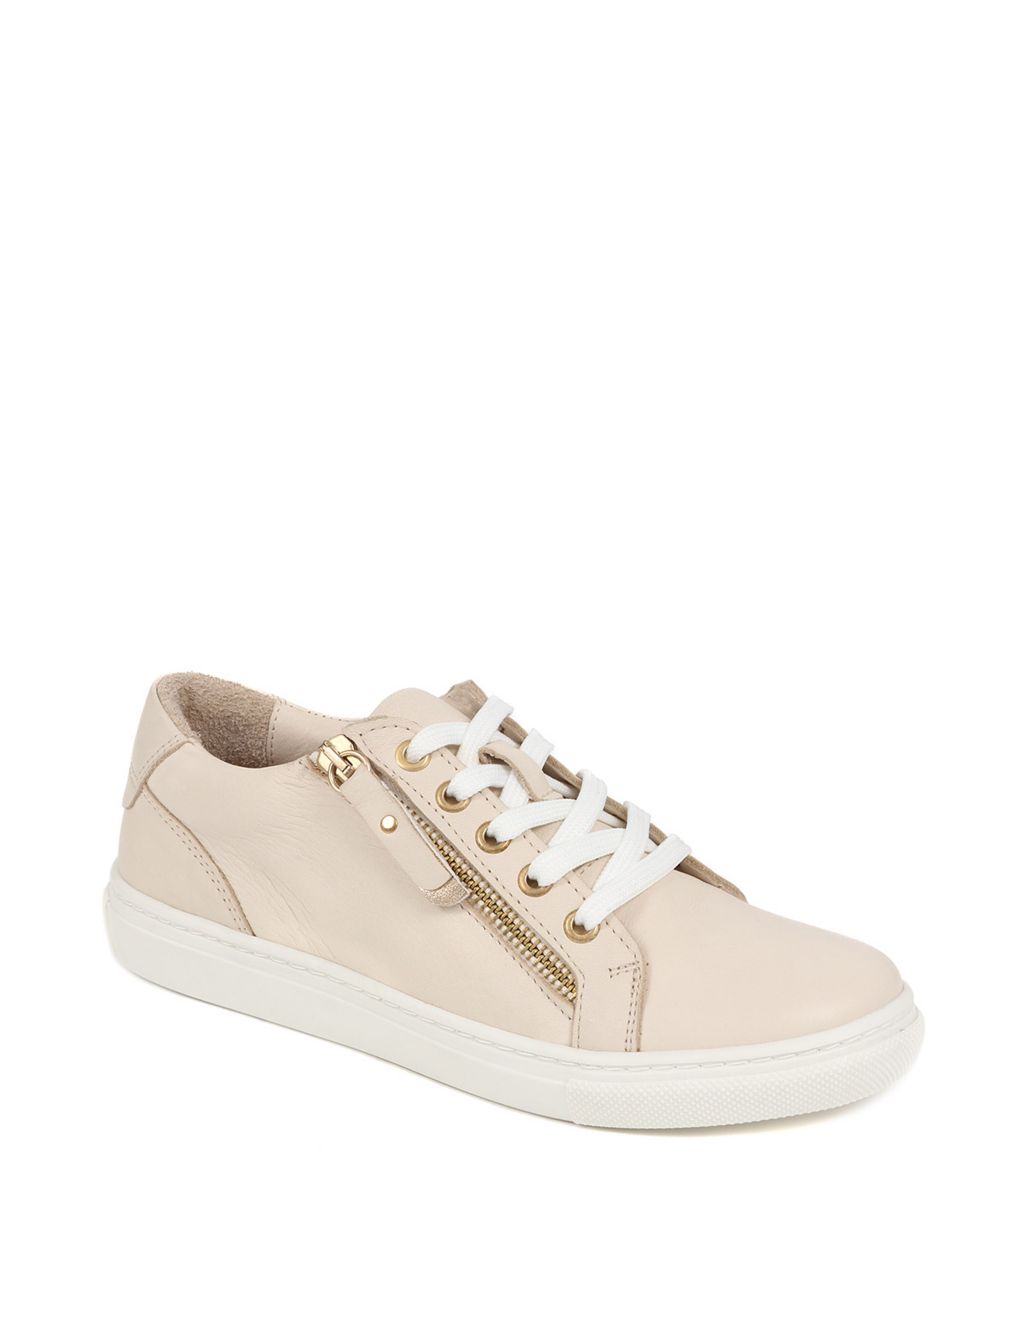 Leather Zip Up Trainers image 3